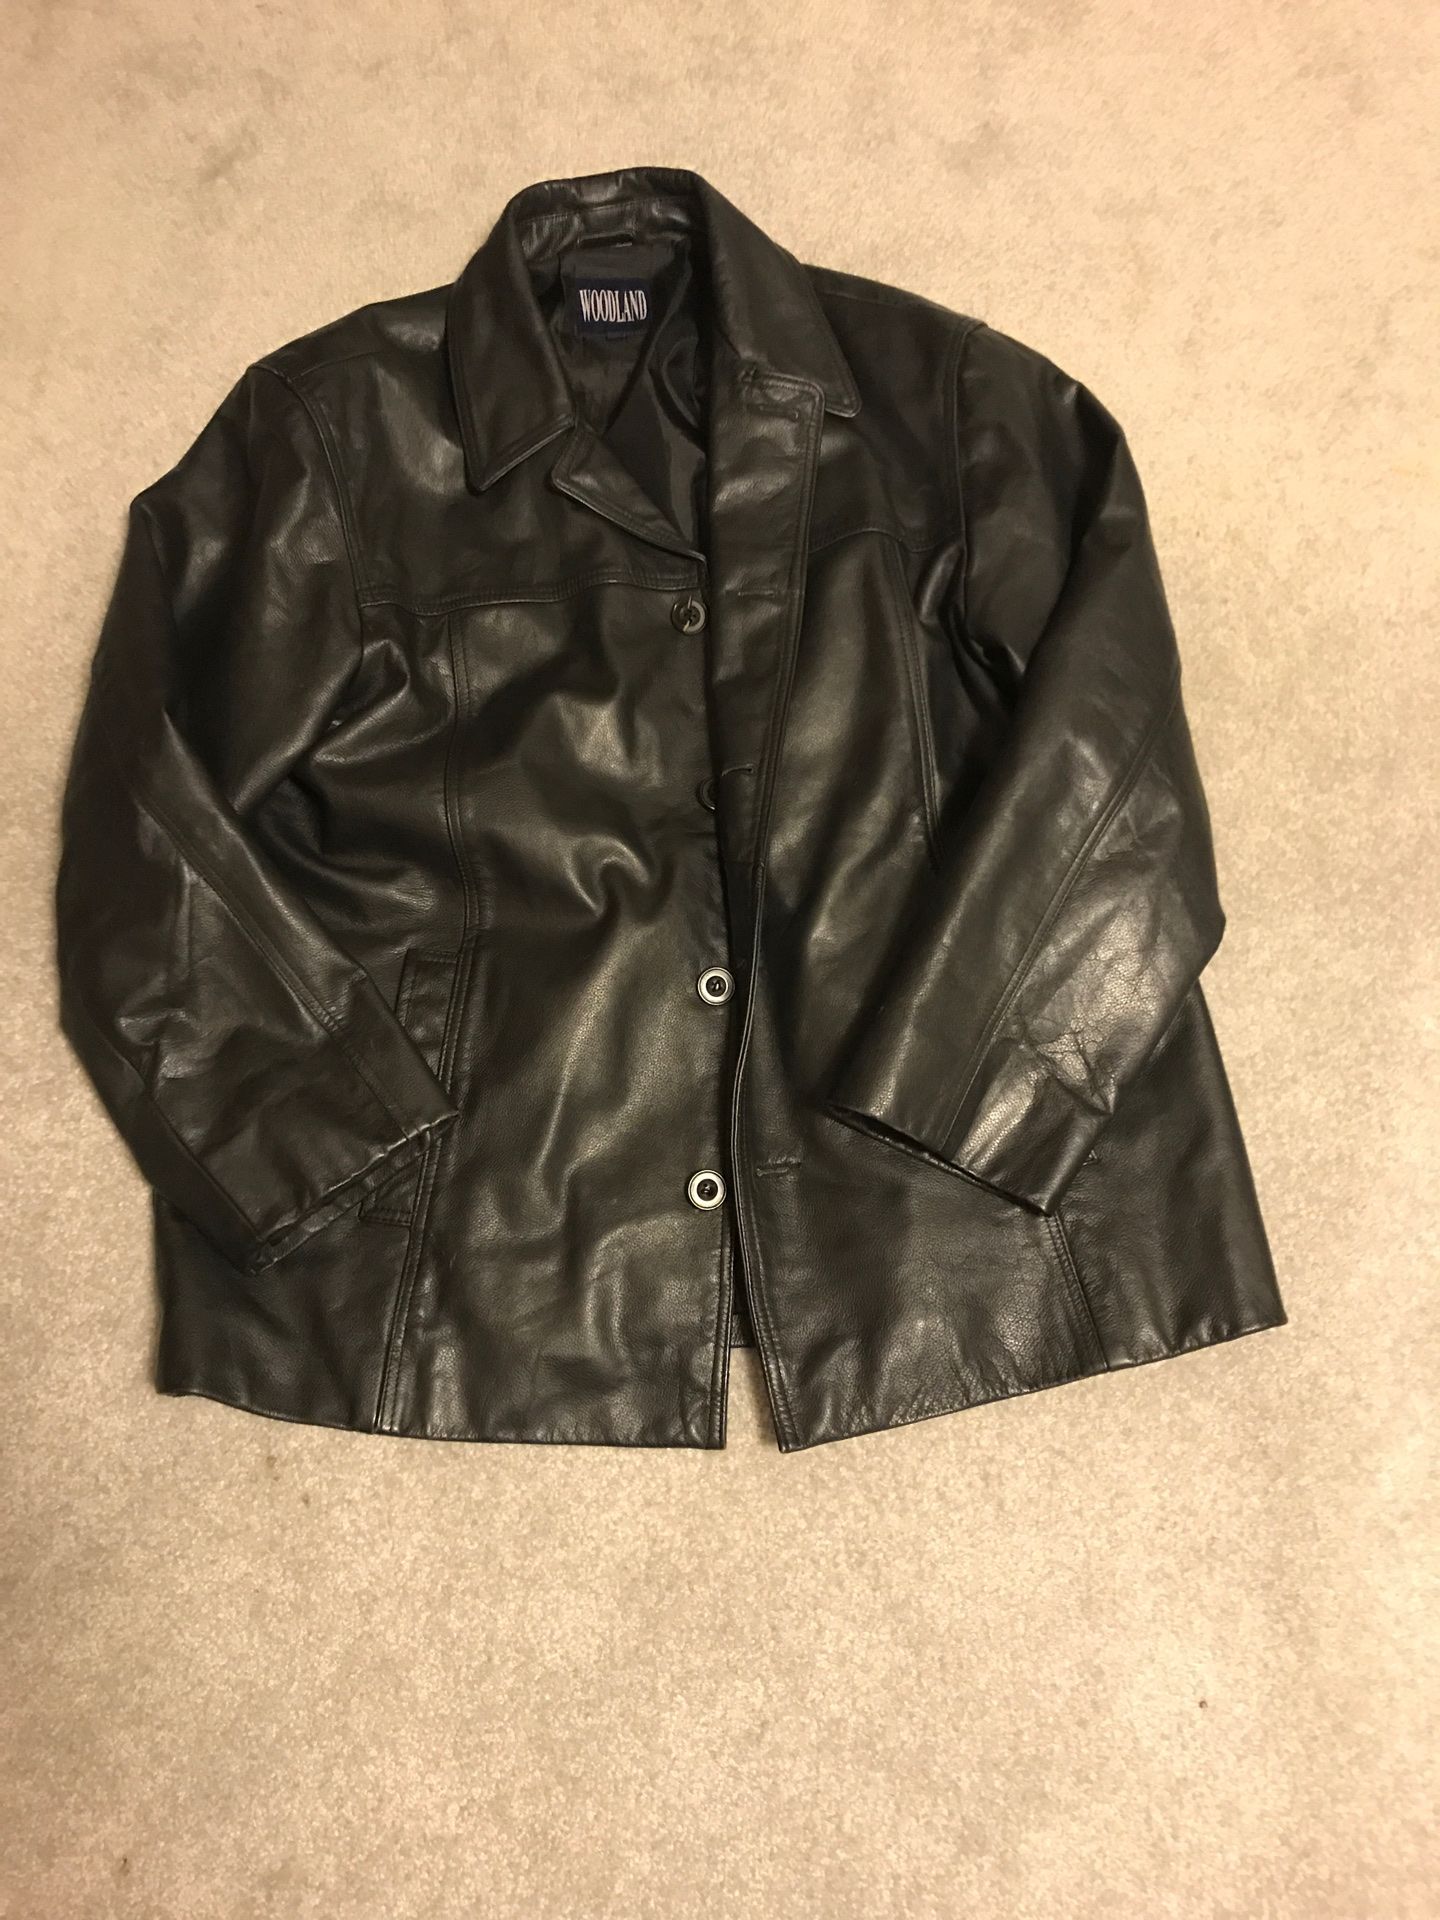 Men’s large leather jacket - no rips or tears